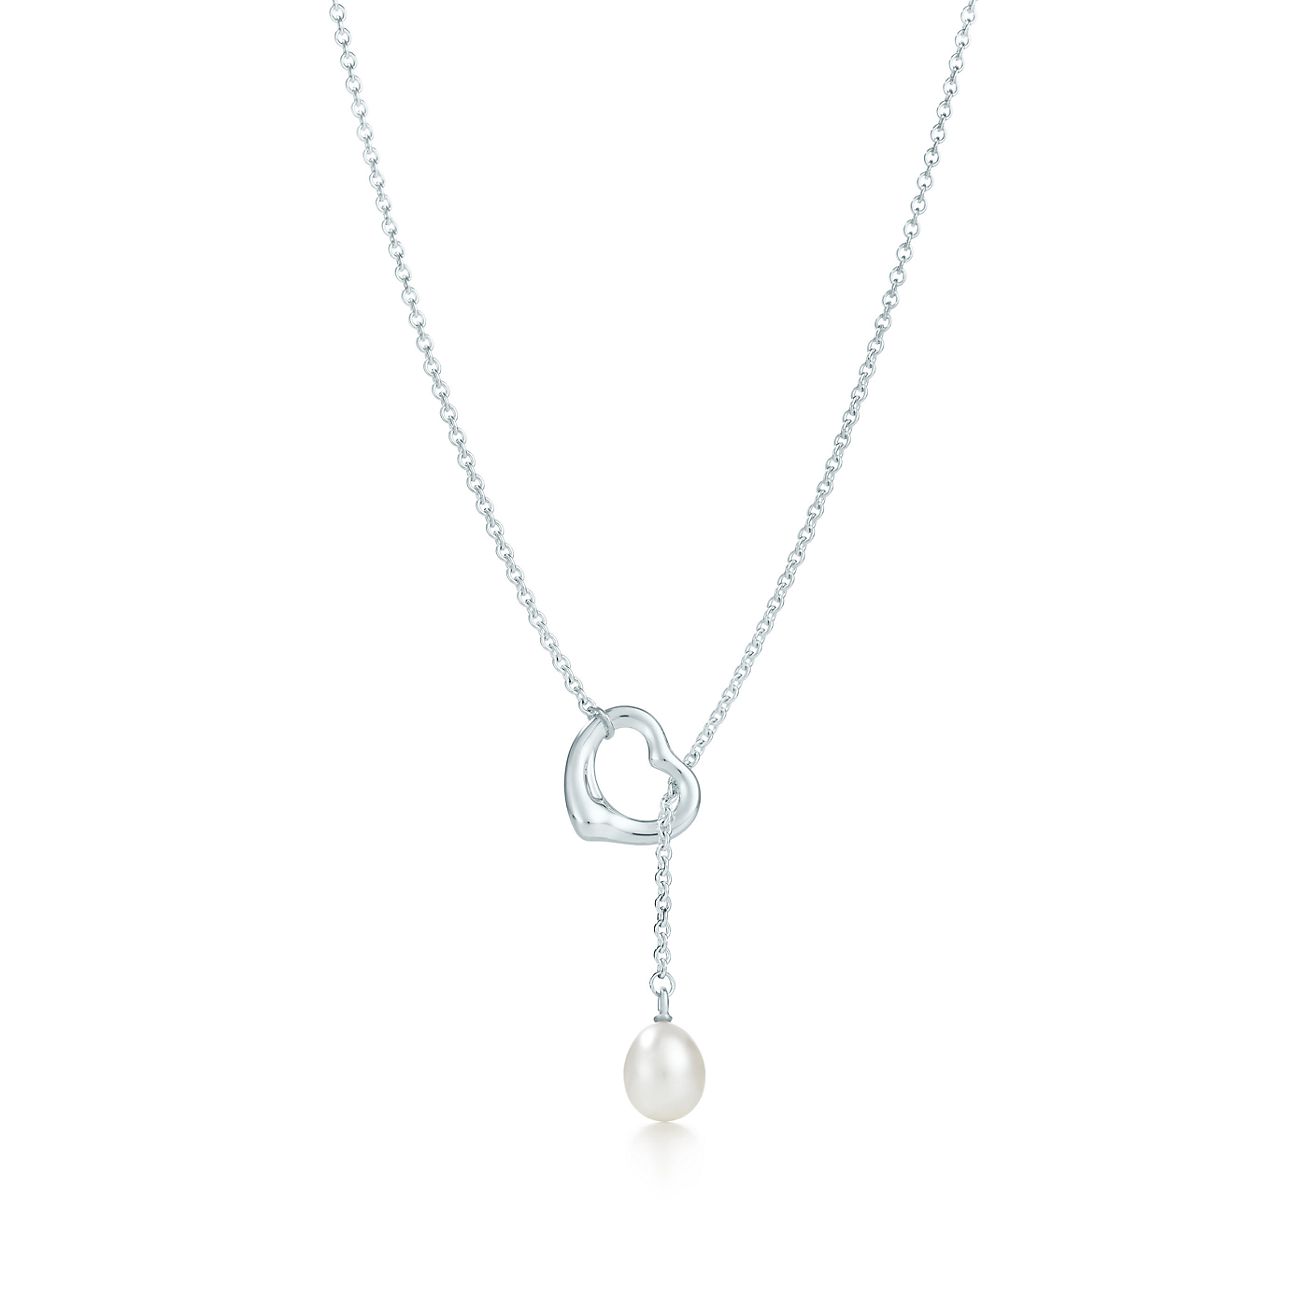 Tiffany and Co Silver Infinity Figure 8 Pearl Necklace Pendant Chain Love  Gift - Etsy